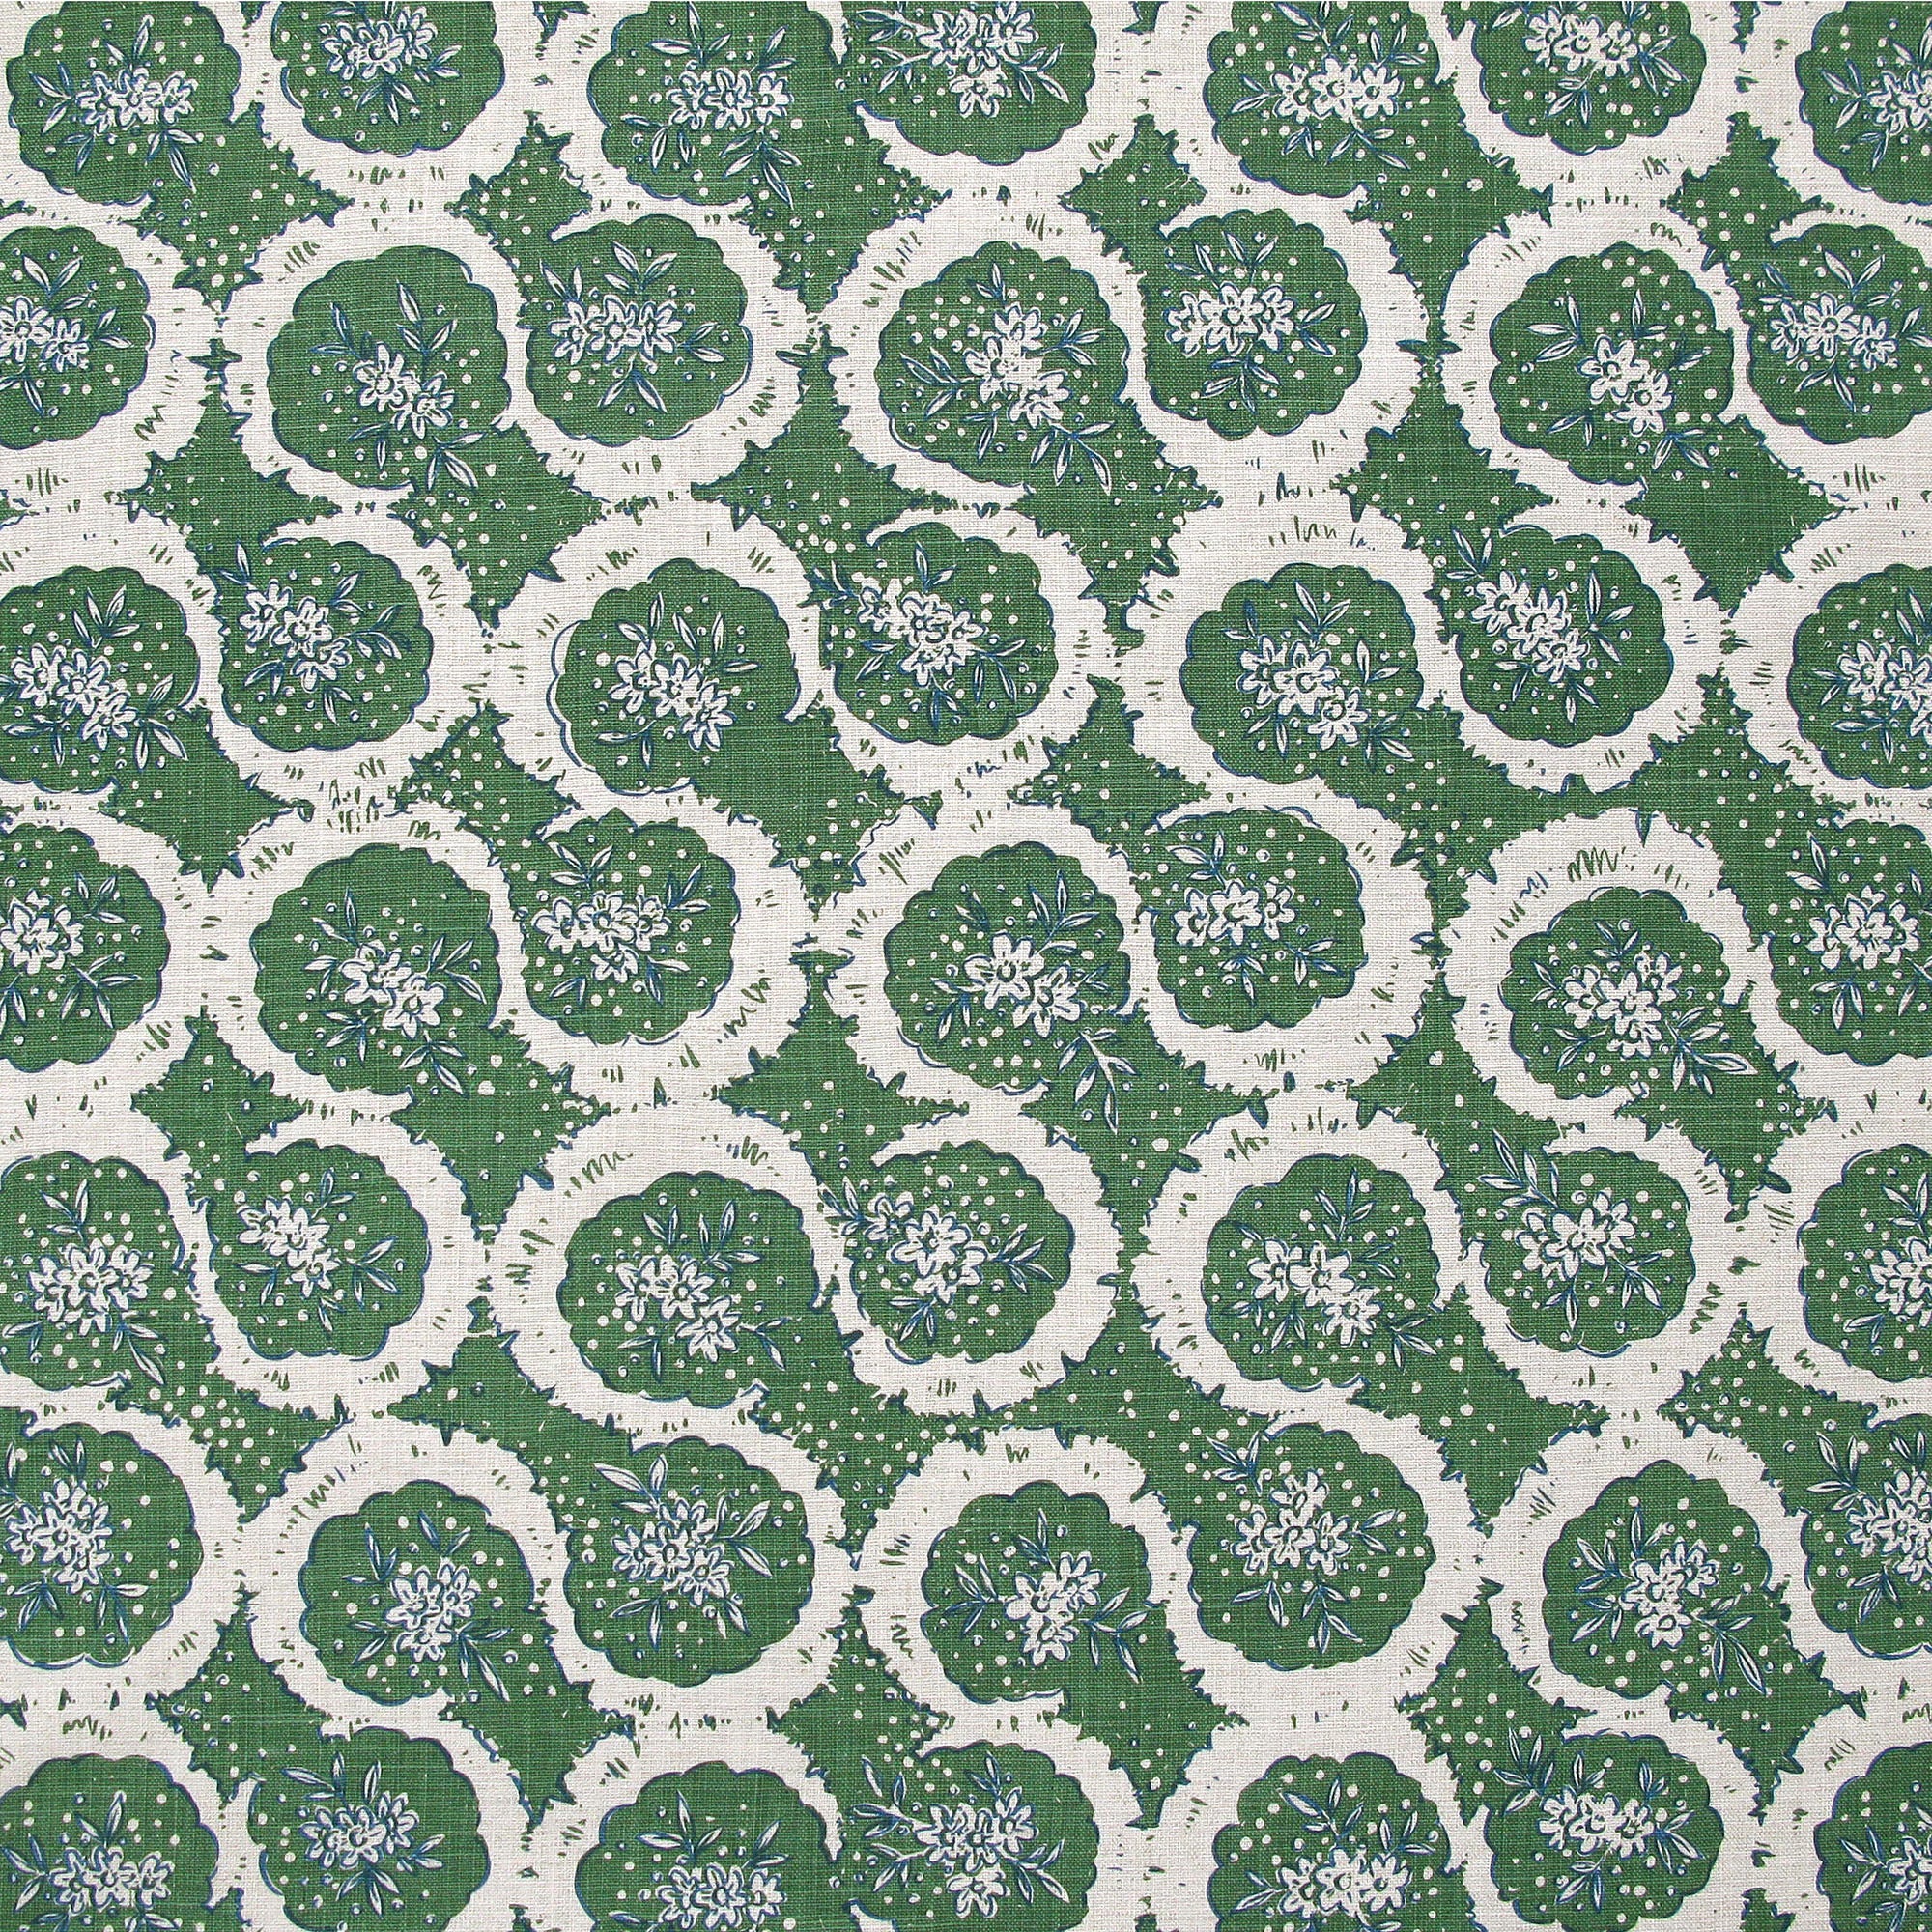 Detail of fabric in a meandering floral grid print in white and dark green on a green field.